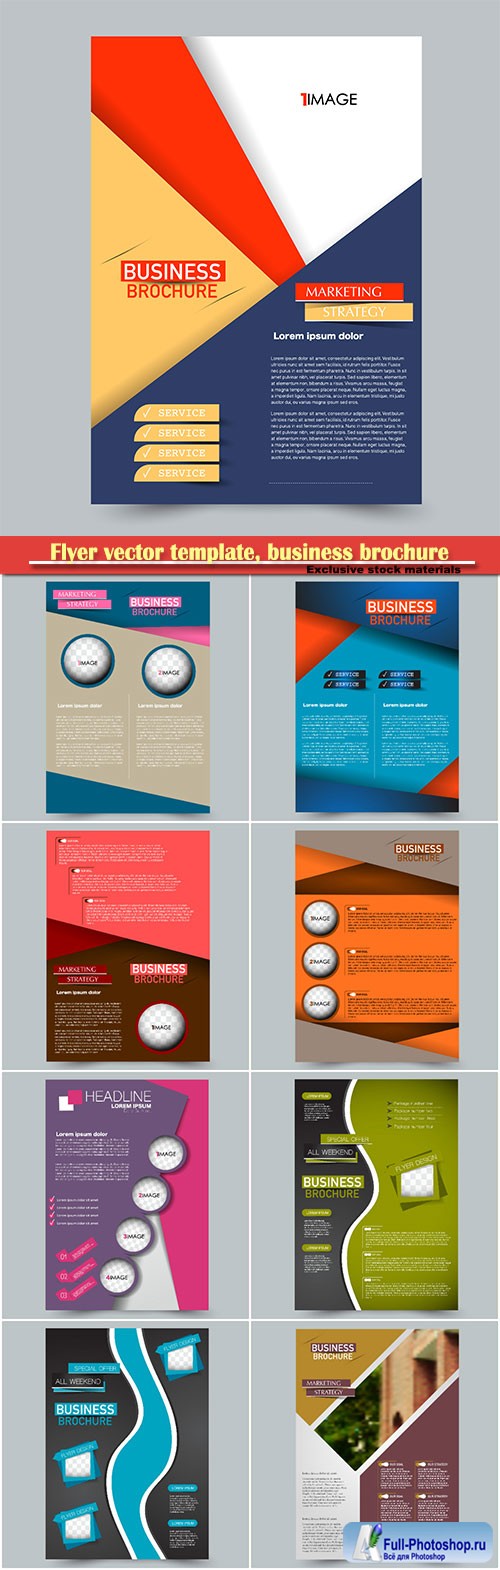 Flyer vector template, business brochure, magazine cover # 36